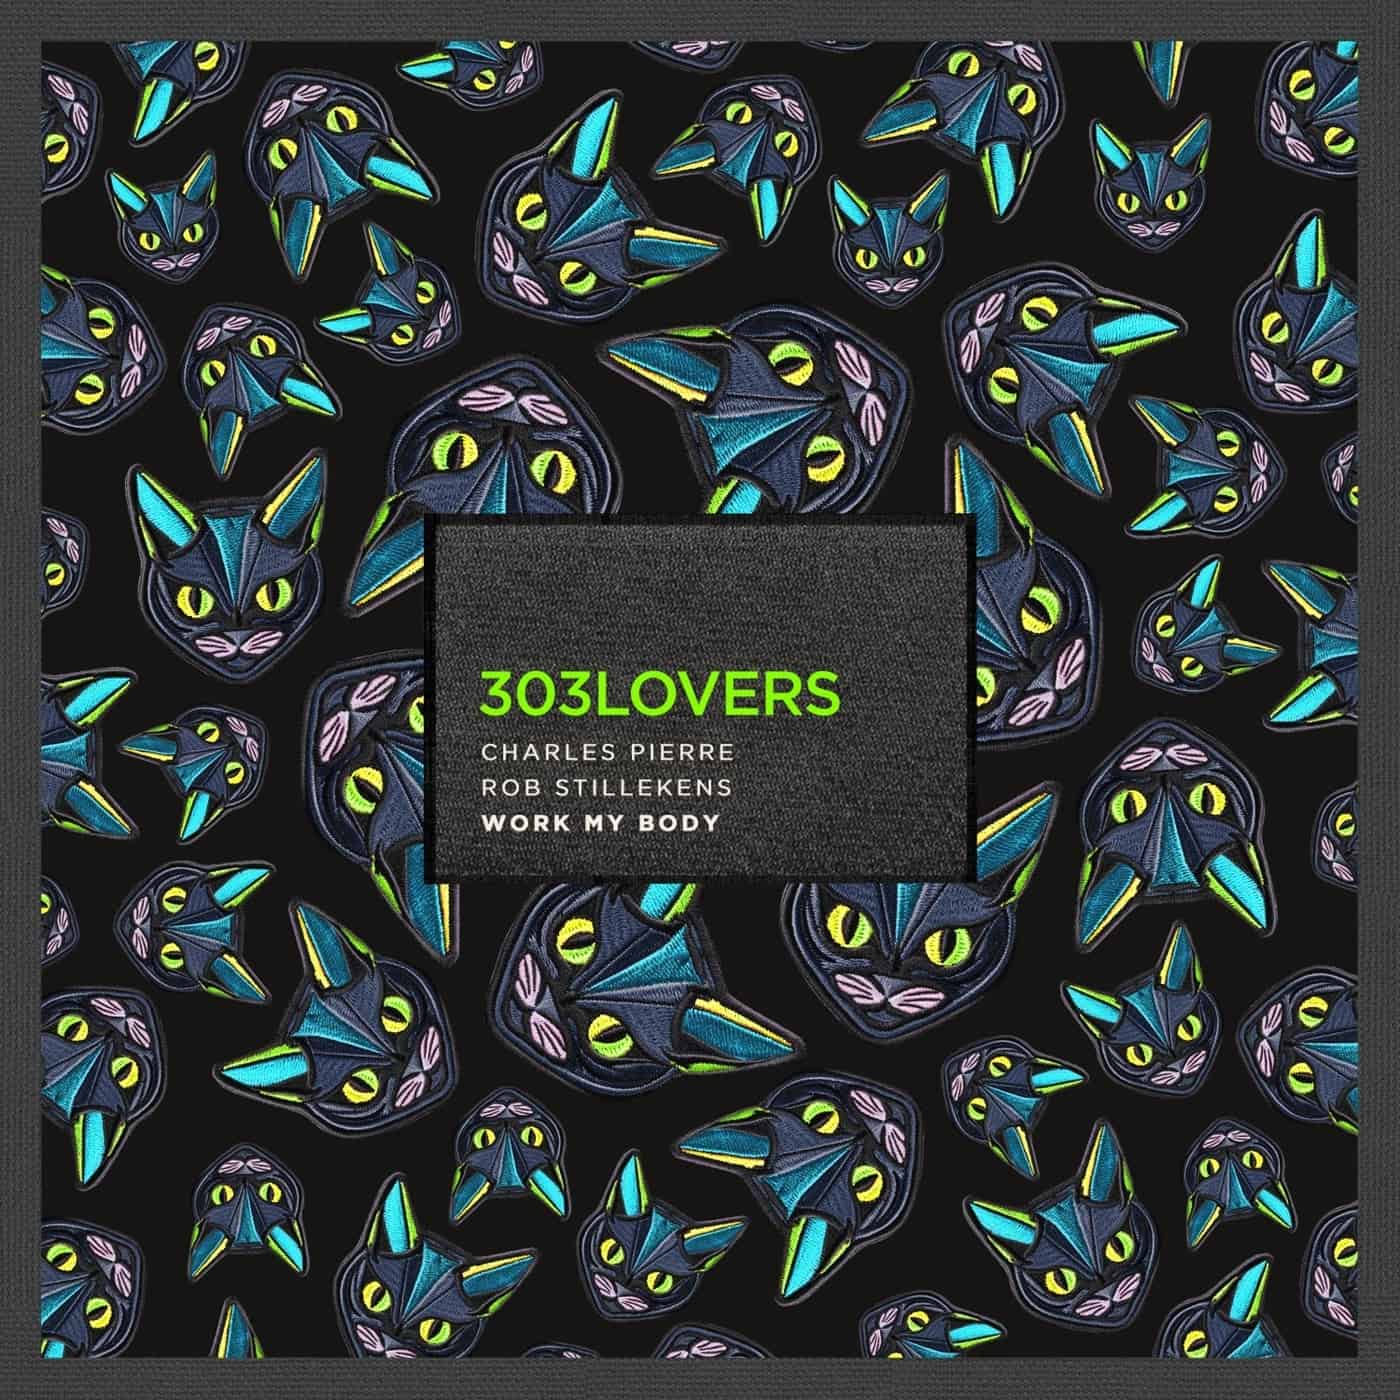 image cover: Charles Pierre, Rob Stillekens - Work My Body on 303Lovers